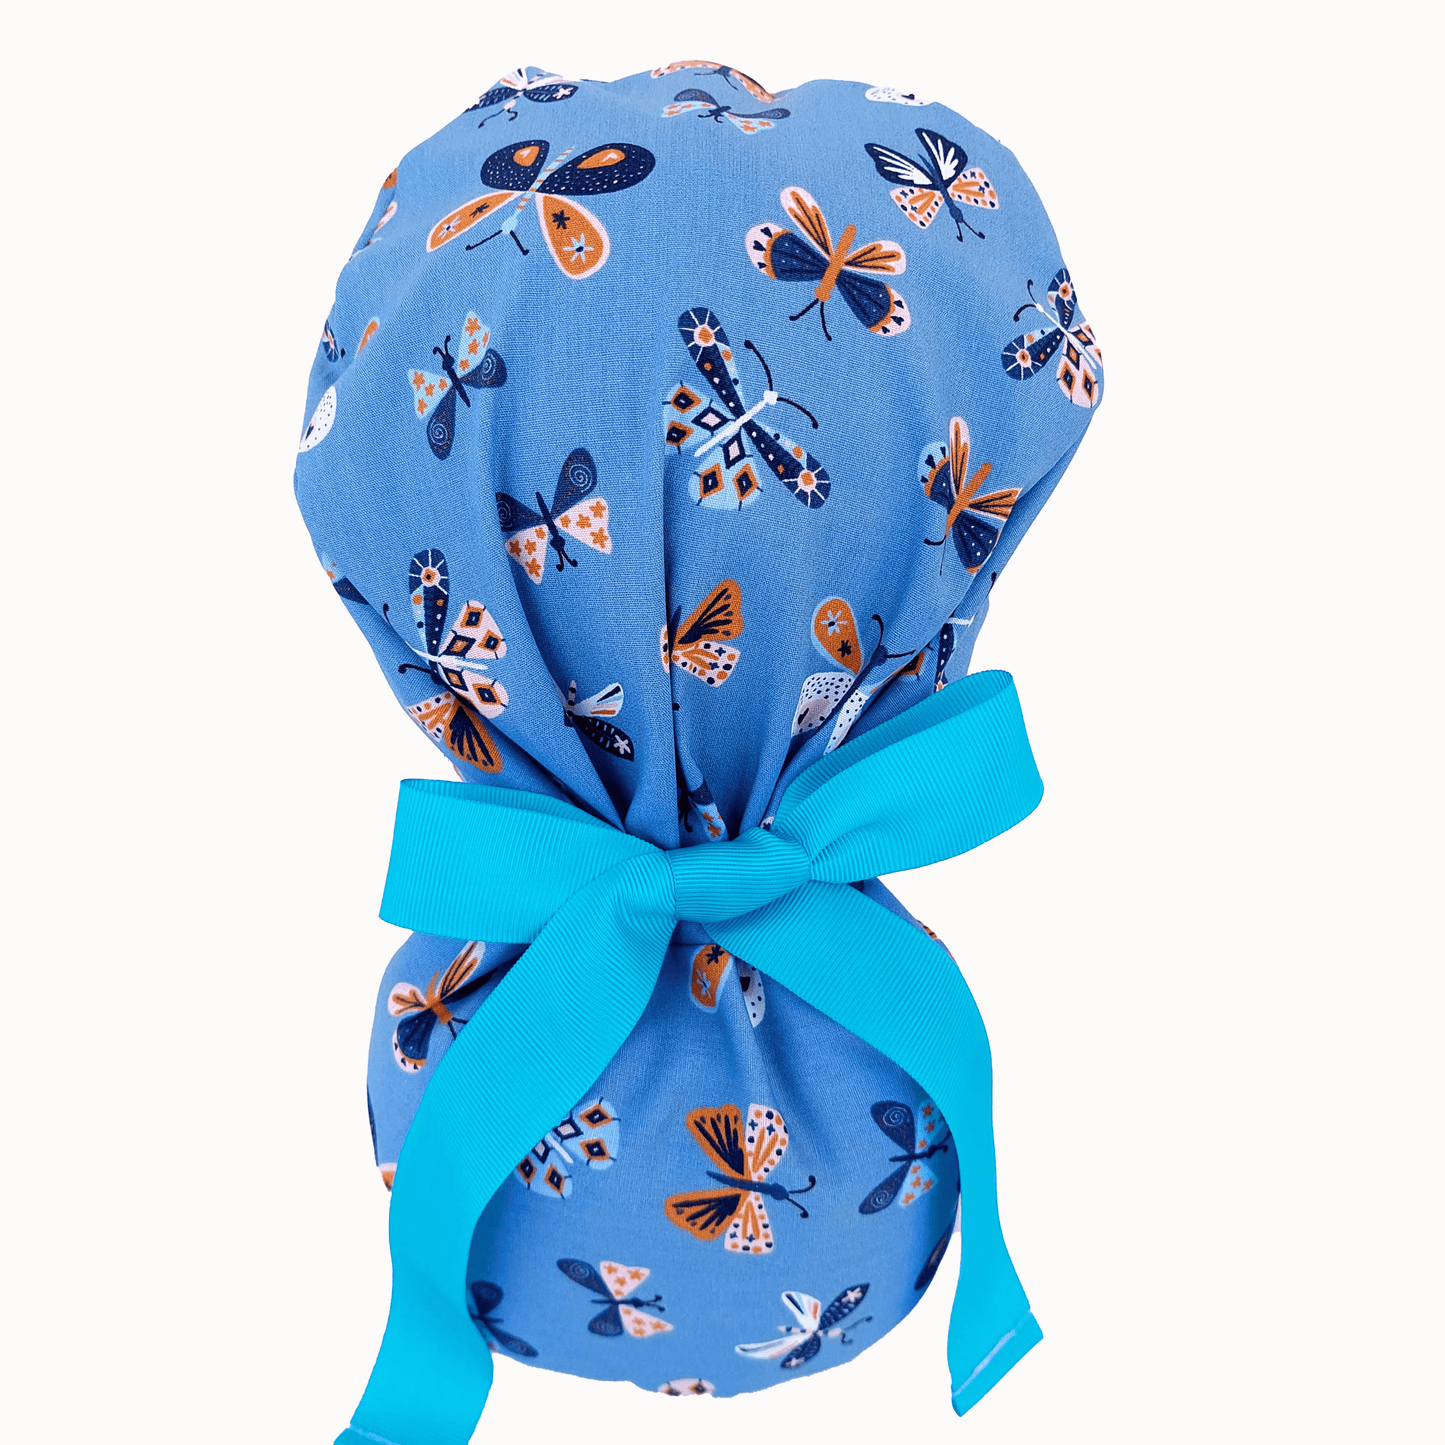 Scrub Cap For Nurses In a mannequin head ,the surgical cap have vibrant blue color and butterflies on it !